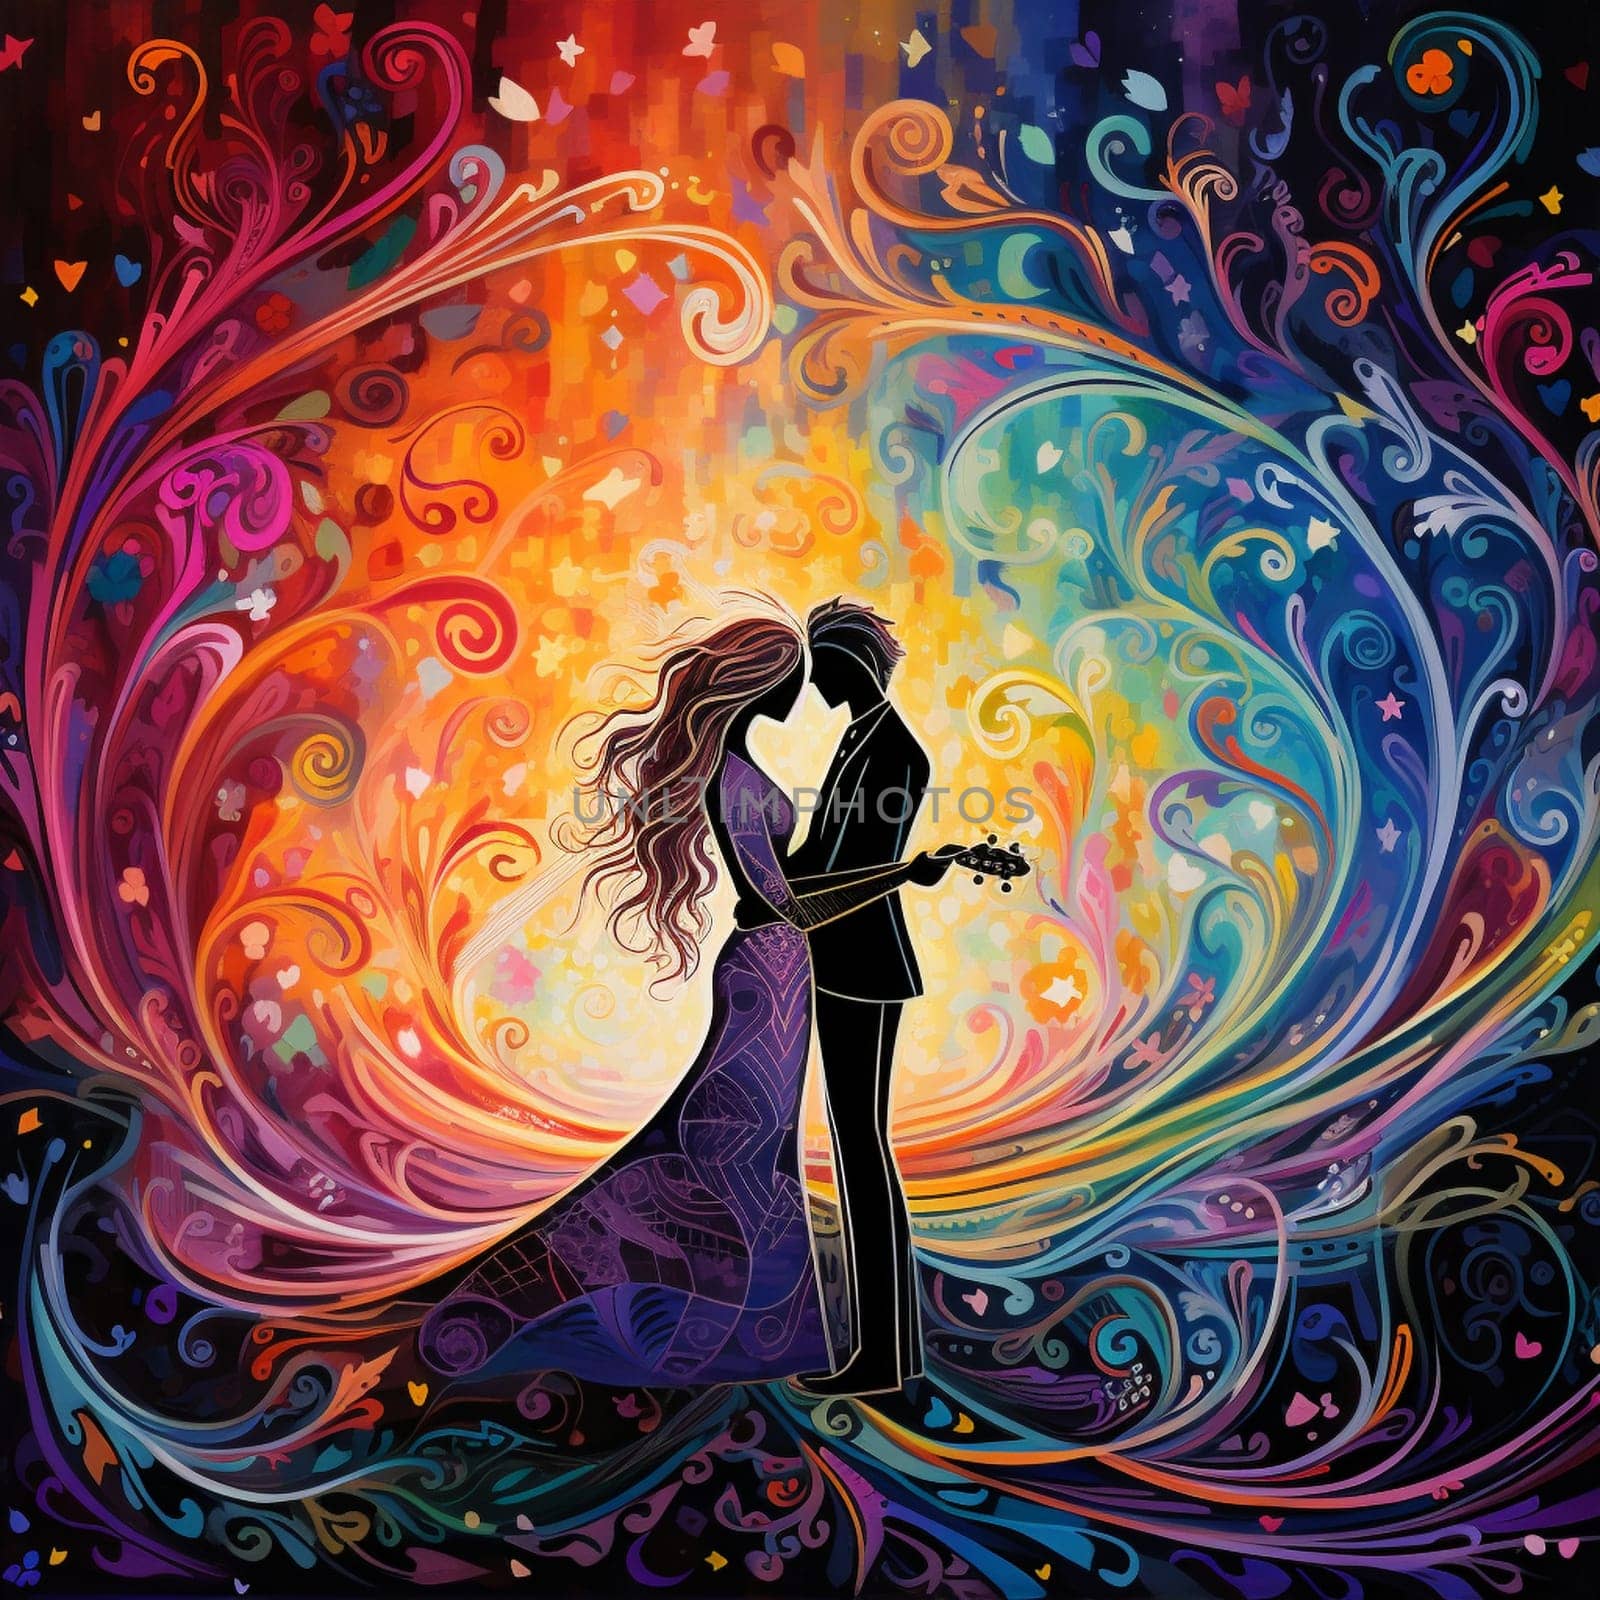 Step into a world of vibrant colors and whimsical art with this enchanting image. In the backdrop, a magical symphony of colorful musical notes and instruments creates a captivating scene, harmonizing in perfect unison behind the two characters. These characters represent different souls, coming together to exchange heartfelt vows. Radiating with an ethereal glow, they symbolize love and unity. One character exhibits a joyful playfulness, while the other emanates a serene and contemplative demeanor. Through their vows, these souls intertwine their destinies, leaving viewers captivated and inspired by the emotional beauty depicted in this vibrant and whimsical artwork.